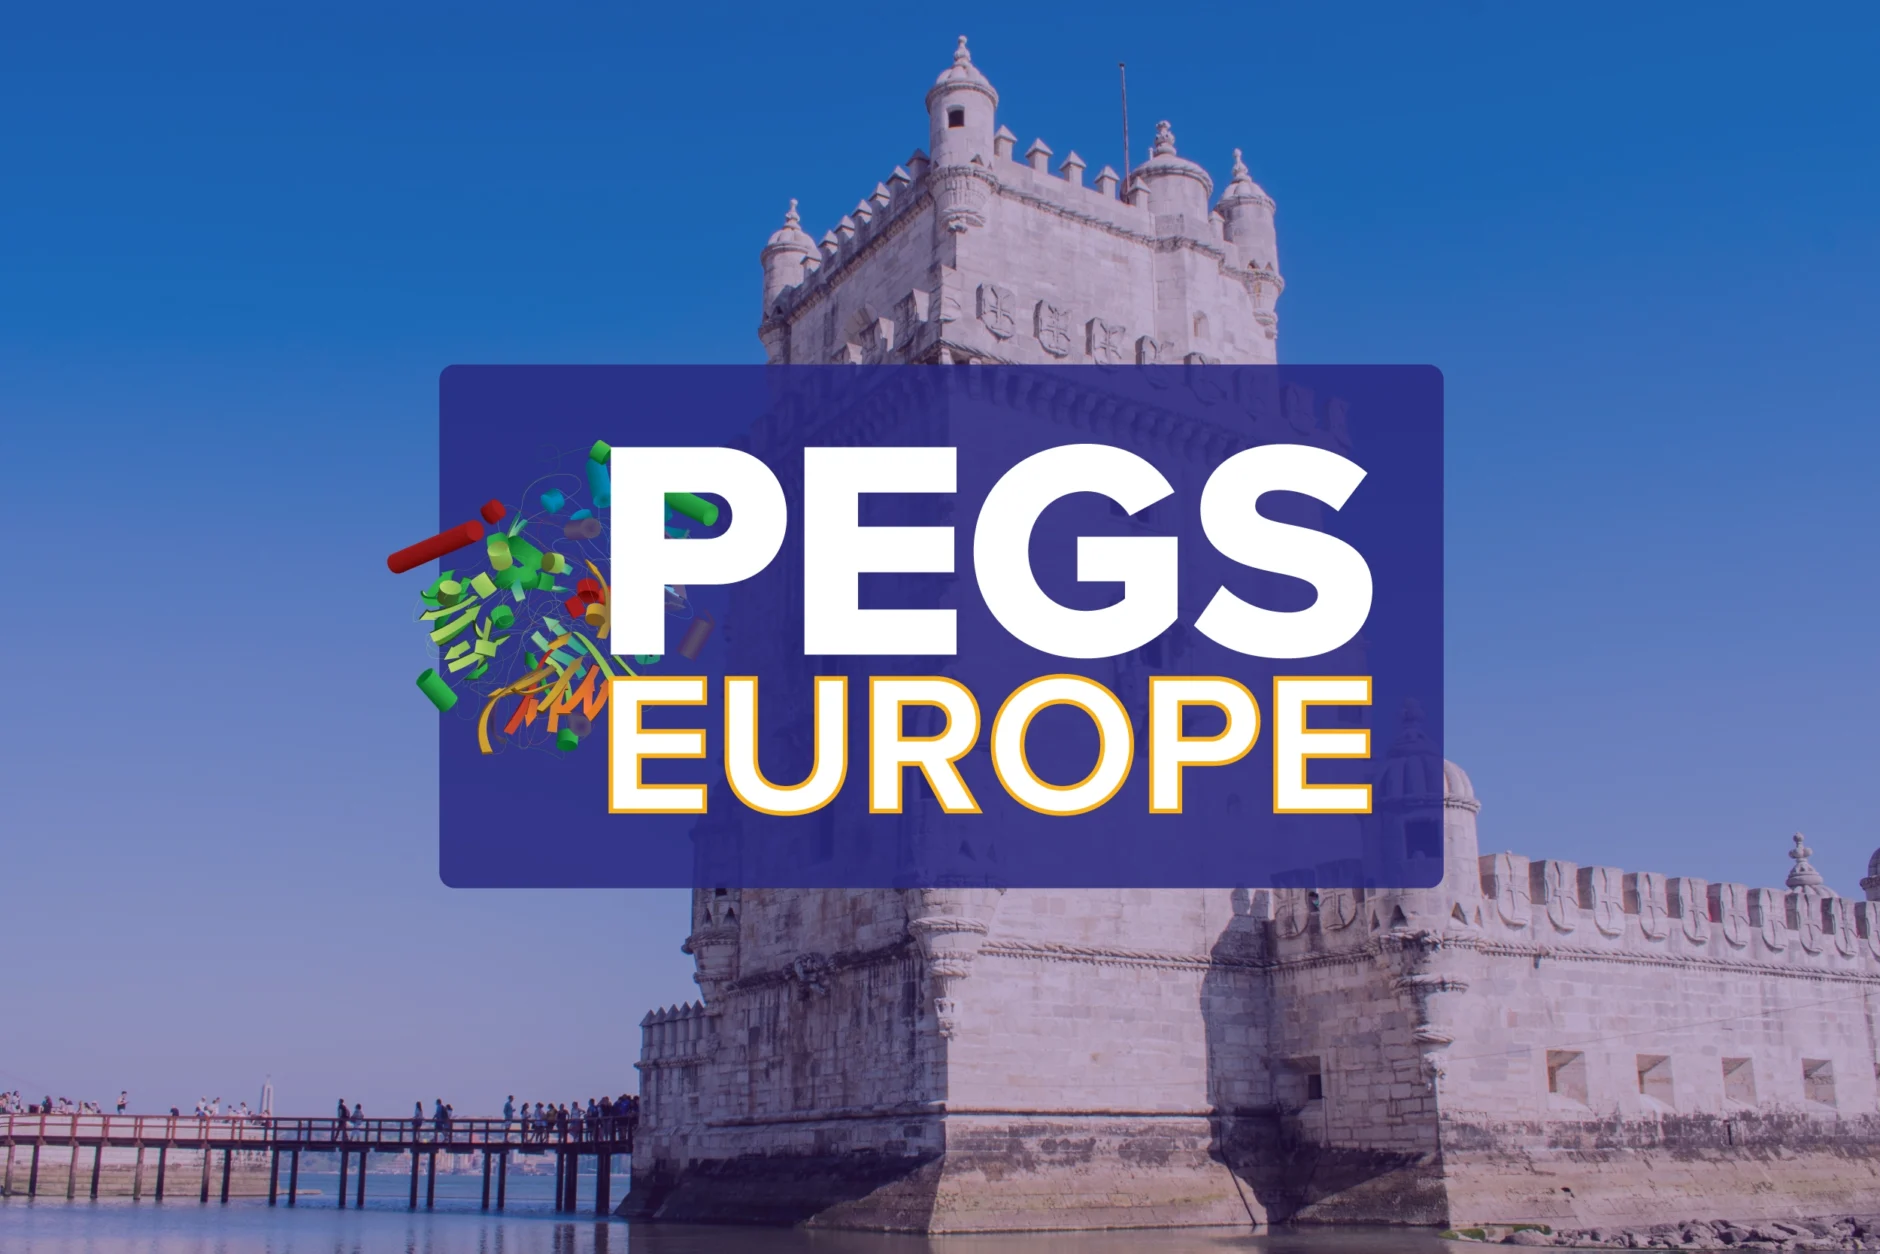 PEGS Europe logo in front of a long stone tower.